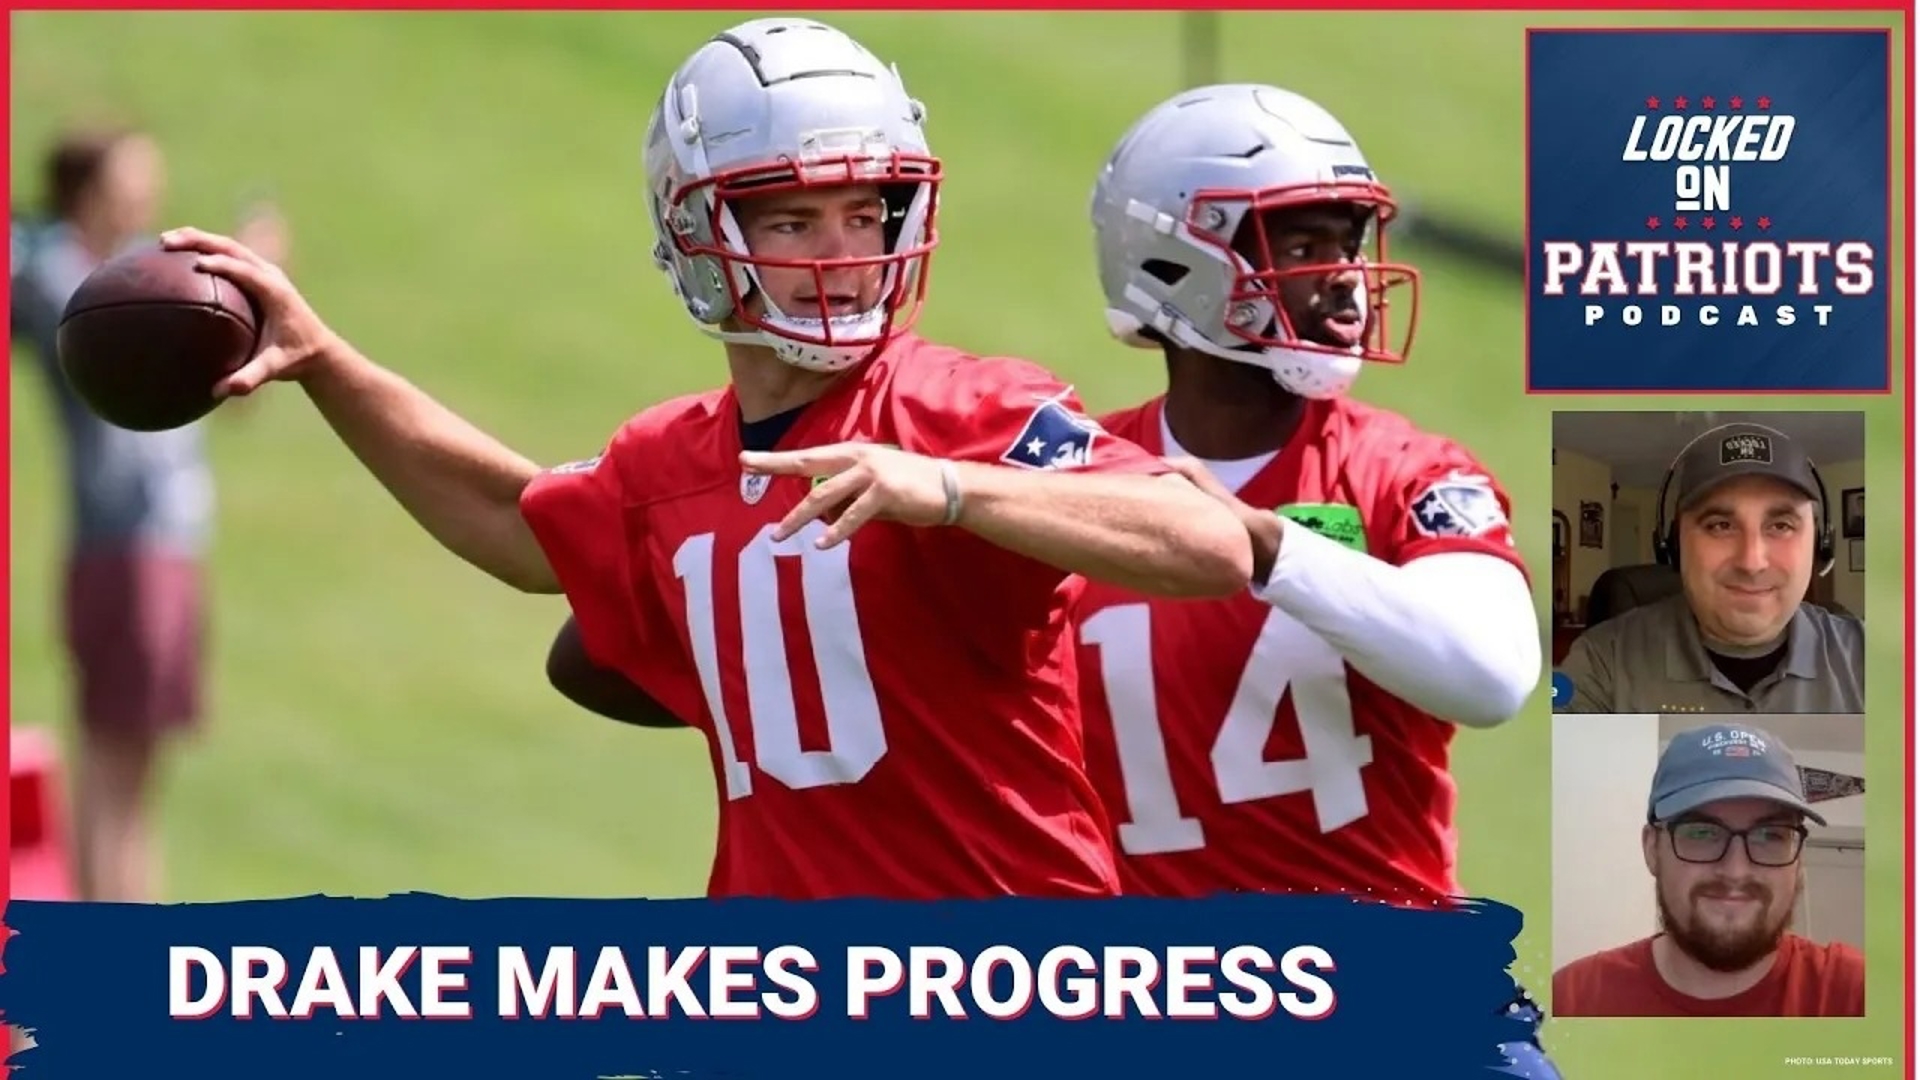 The New England Patriots finished mandatory minicamp last week, capping rookie Drake Maye’s first offseason workout as an NFL quarterback.